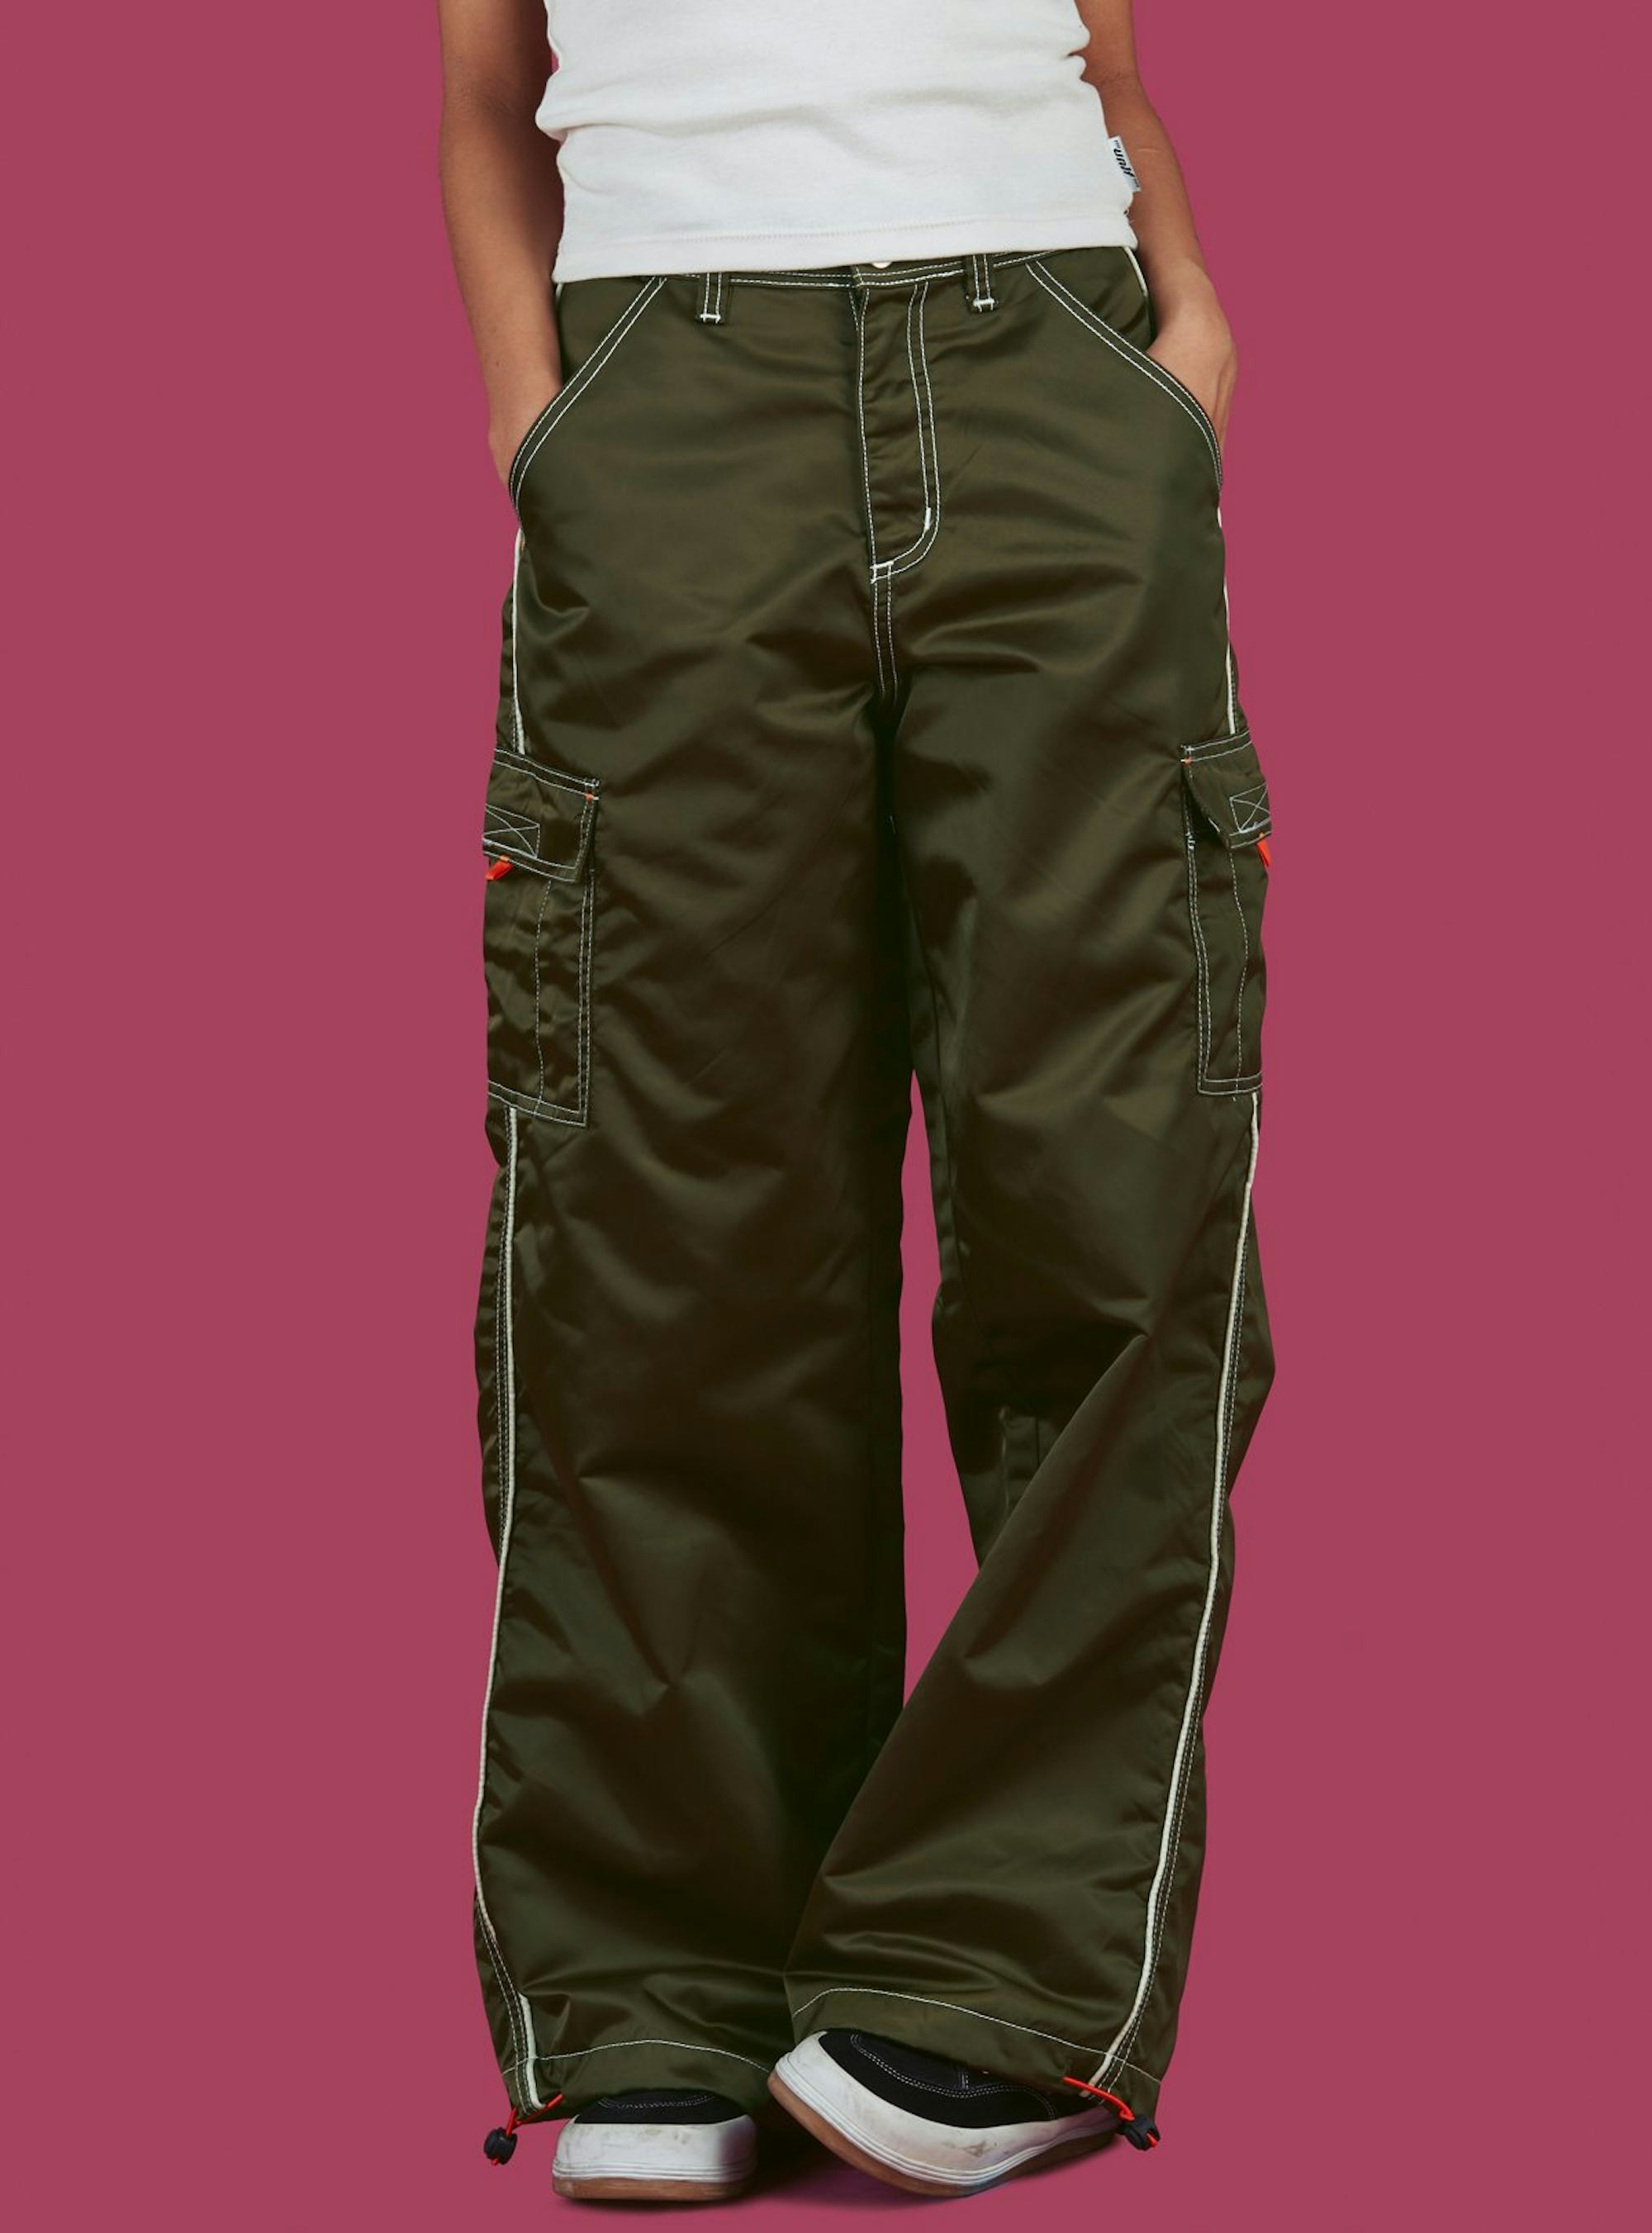 Cargo Pants Are Going To Be Everywhere This Fall